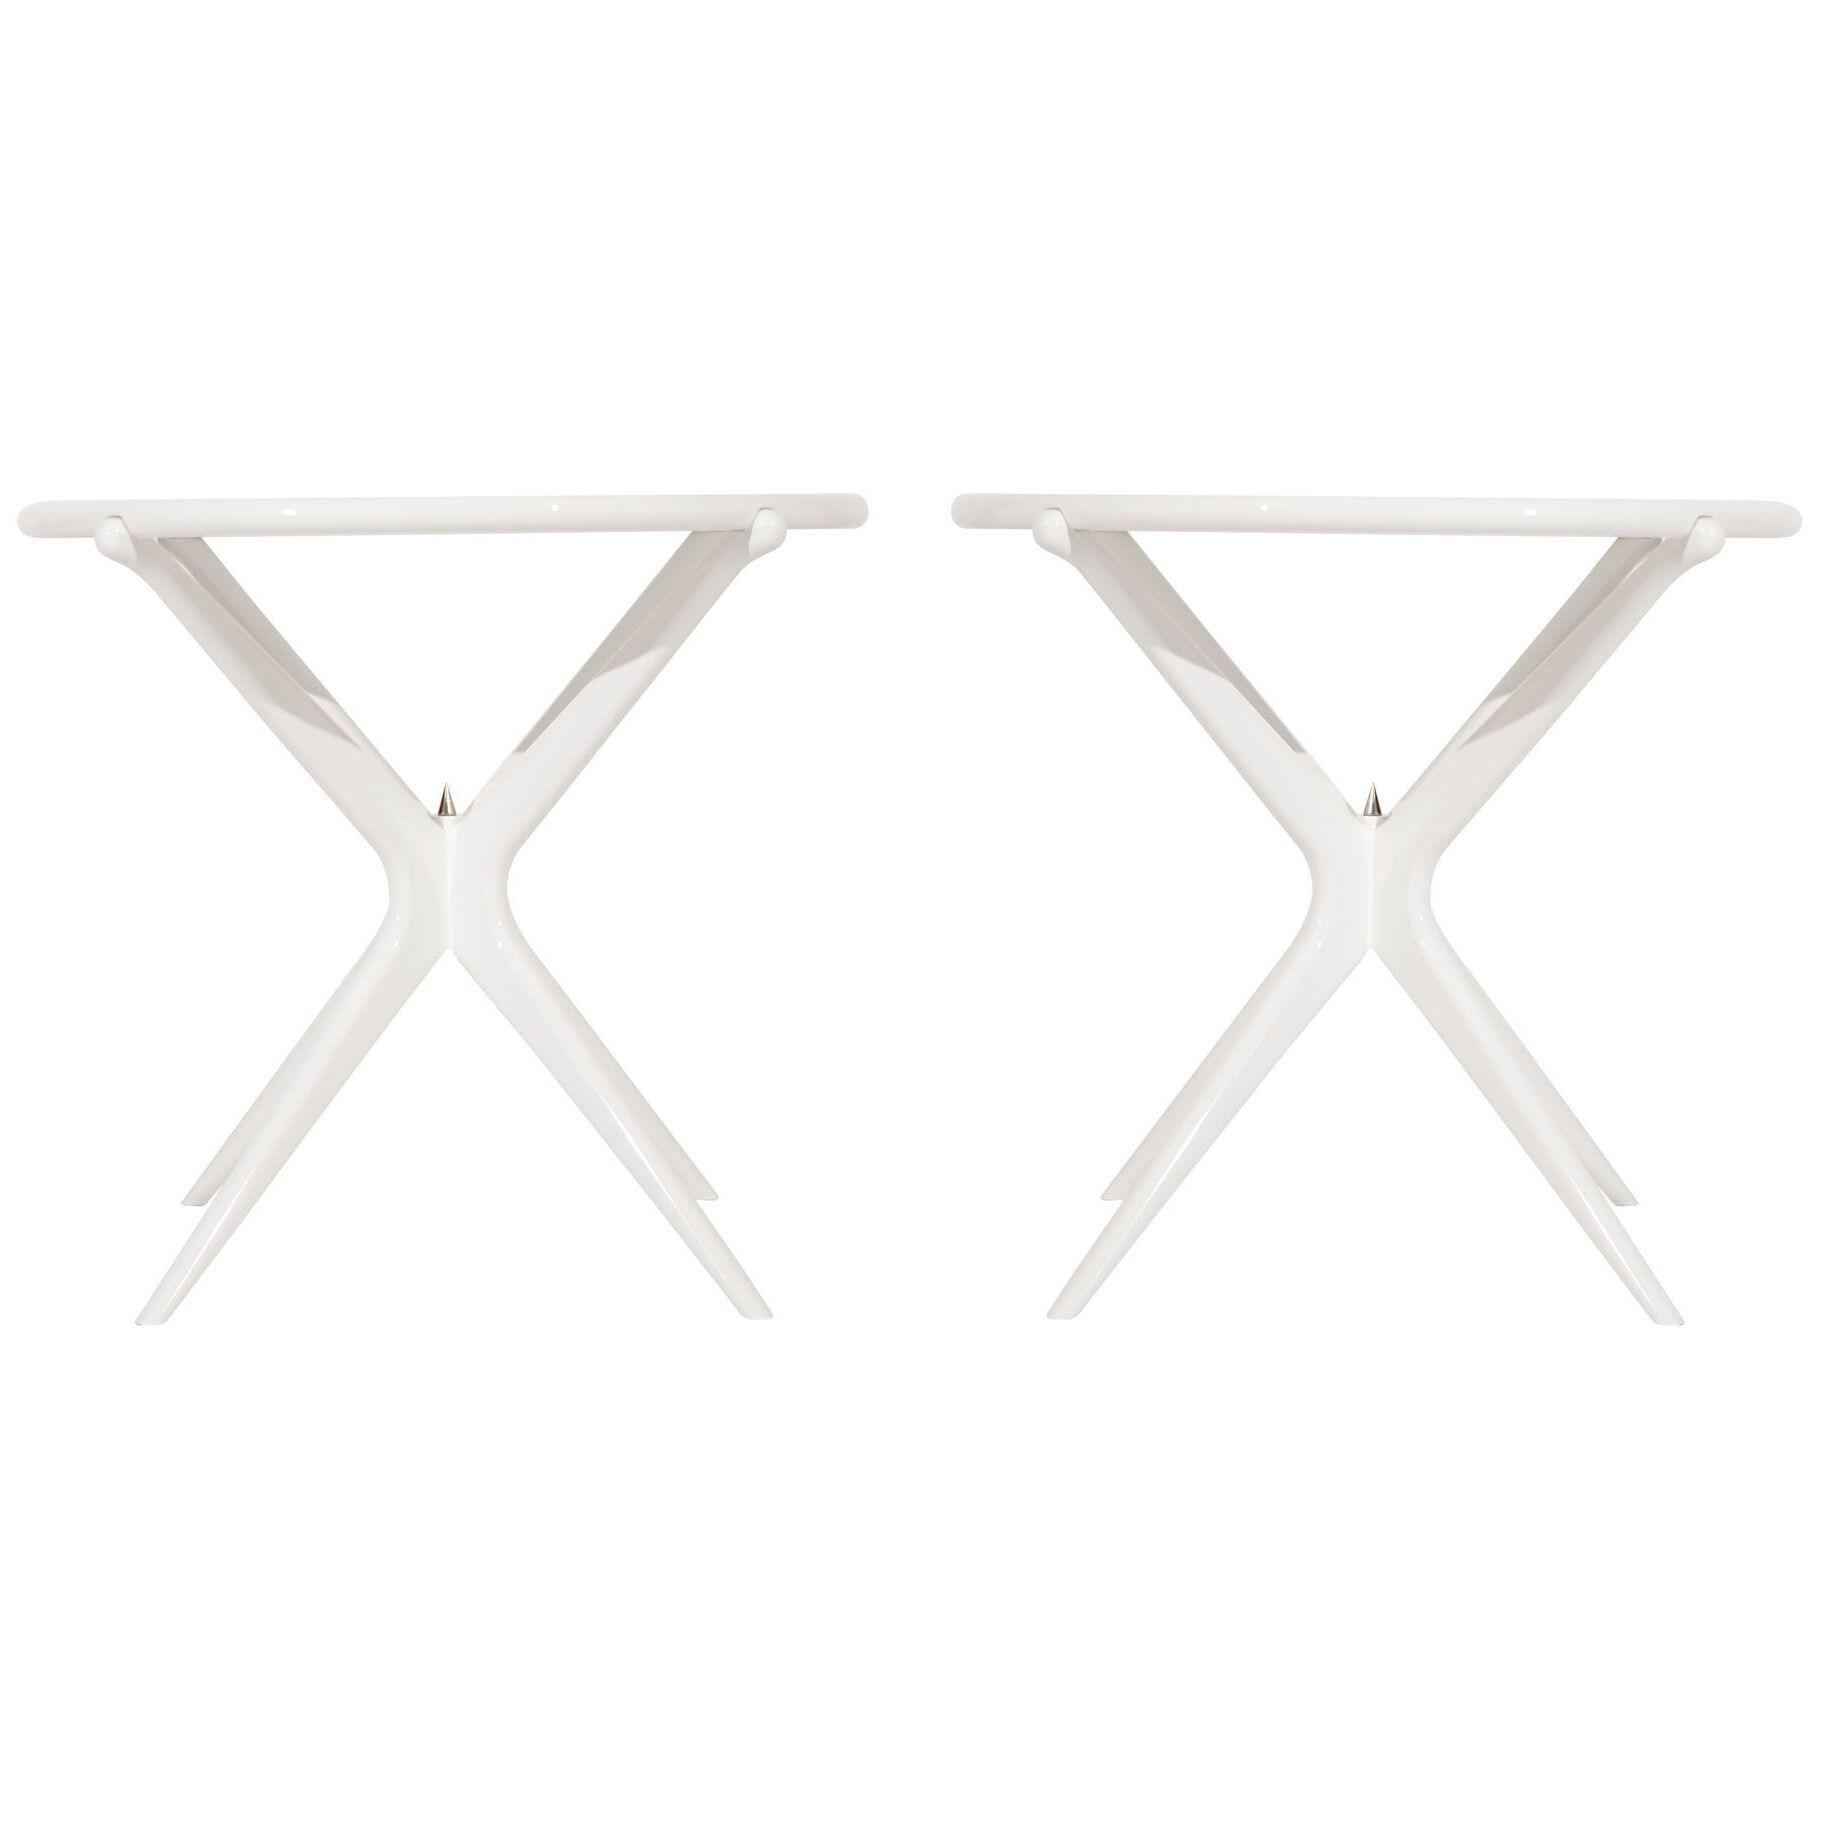 Gazelle V2 End Tables in White Lacquer by Stamford Modern